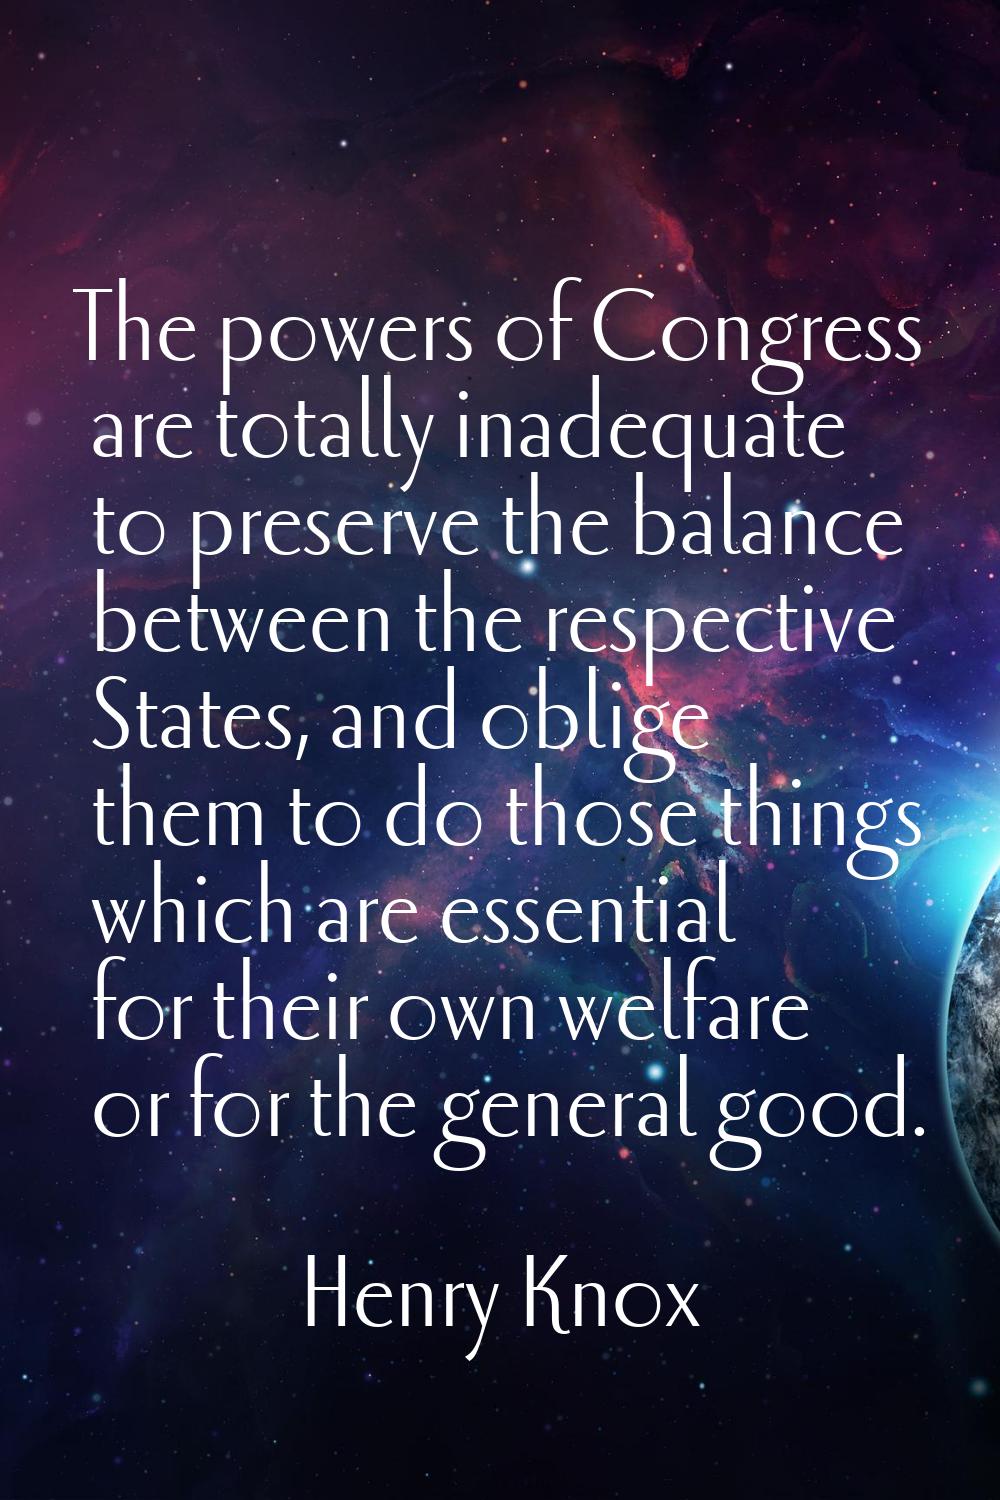 The powers of Congress are totally inadequate to preserve the balance between the respective States